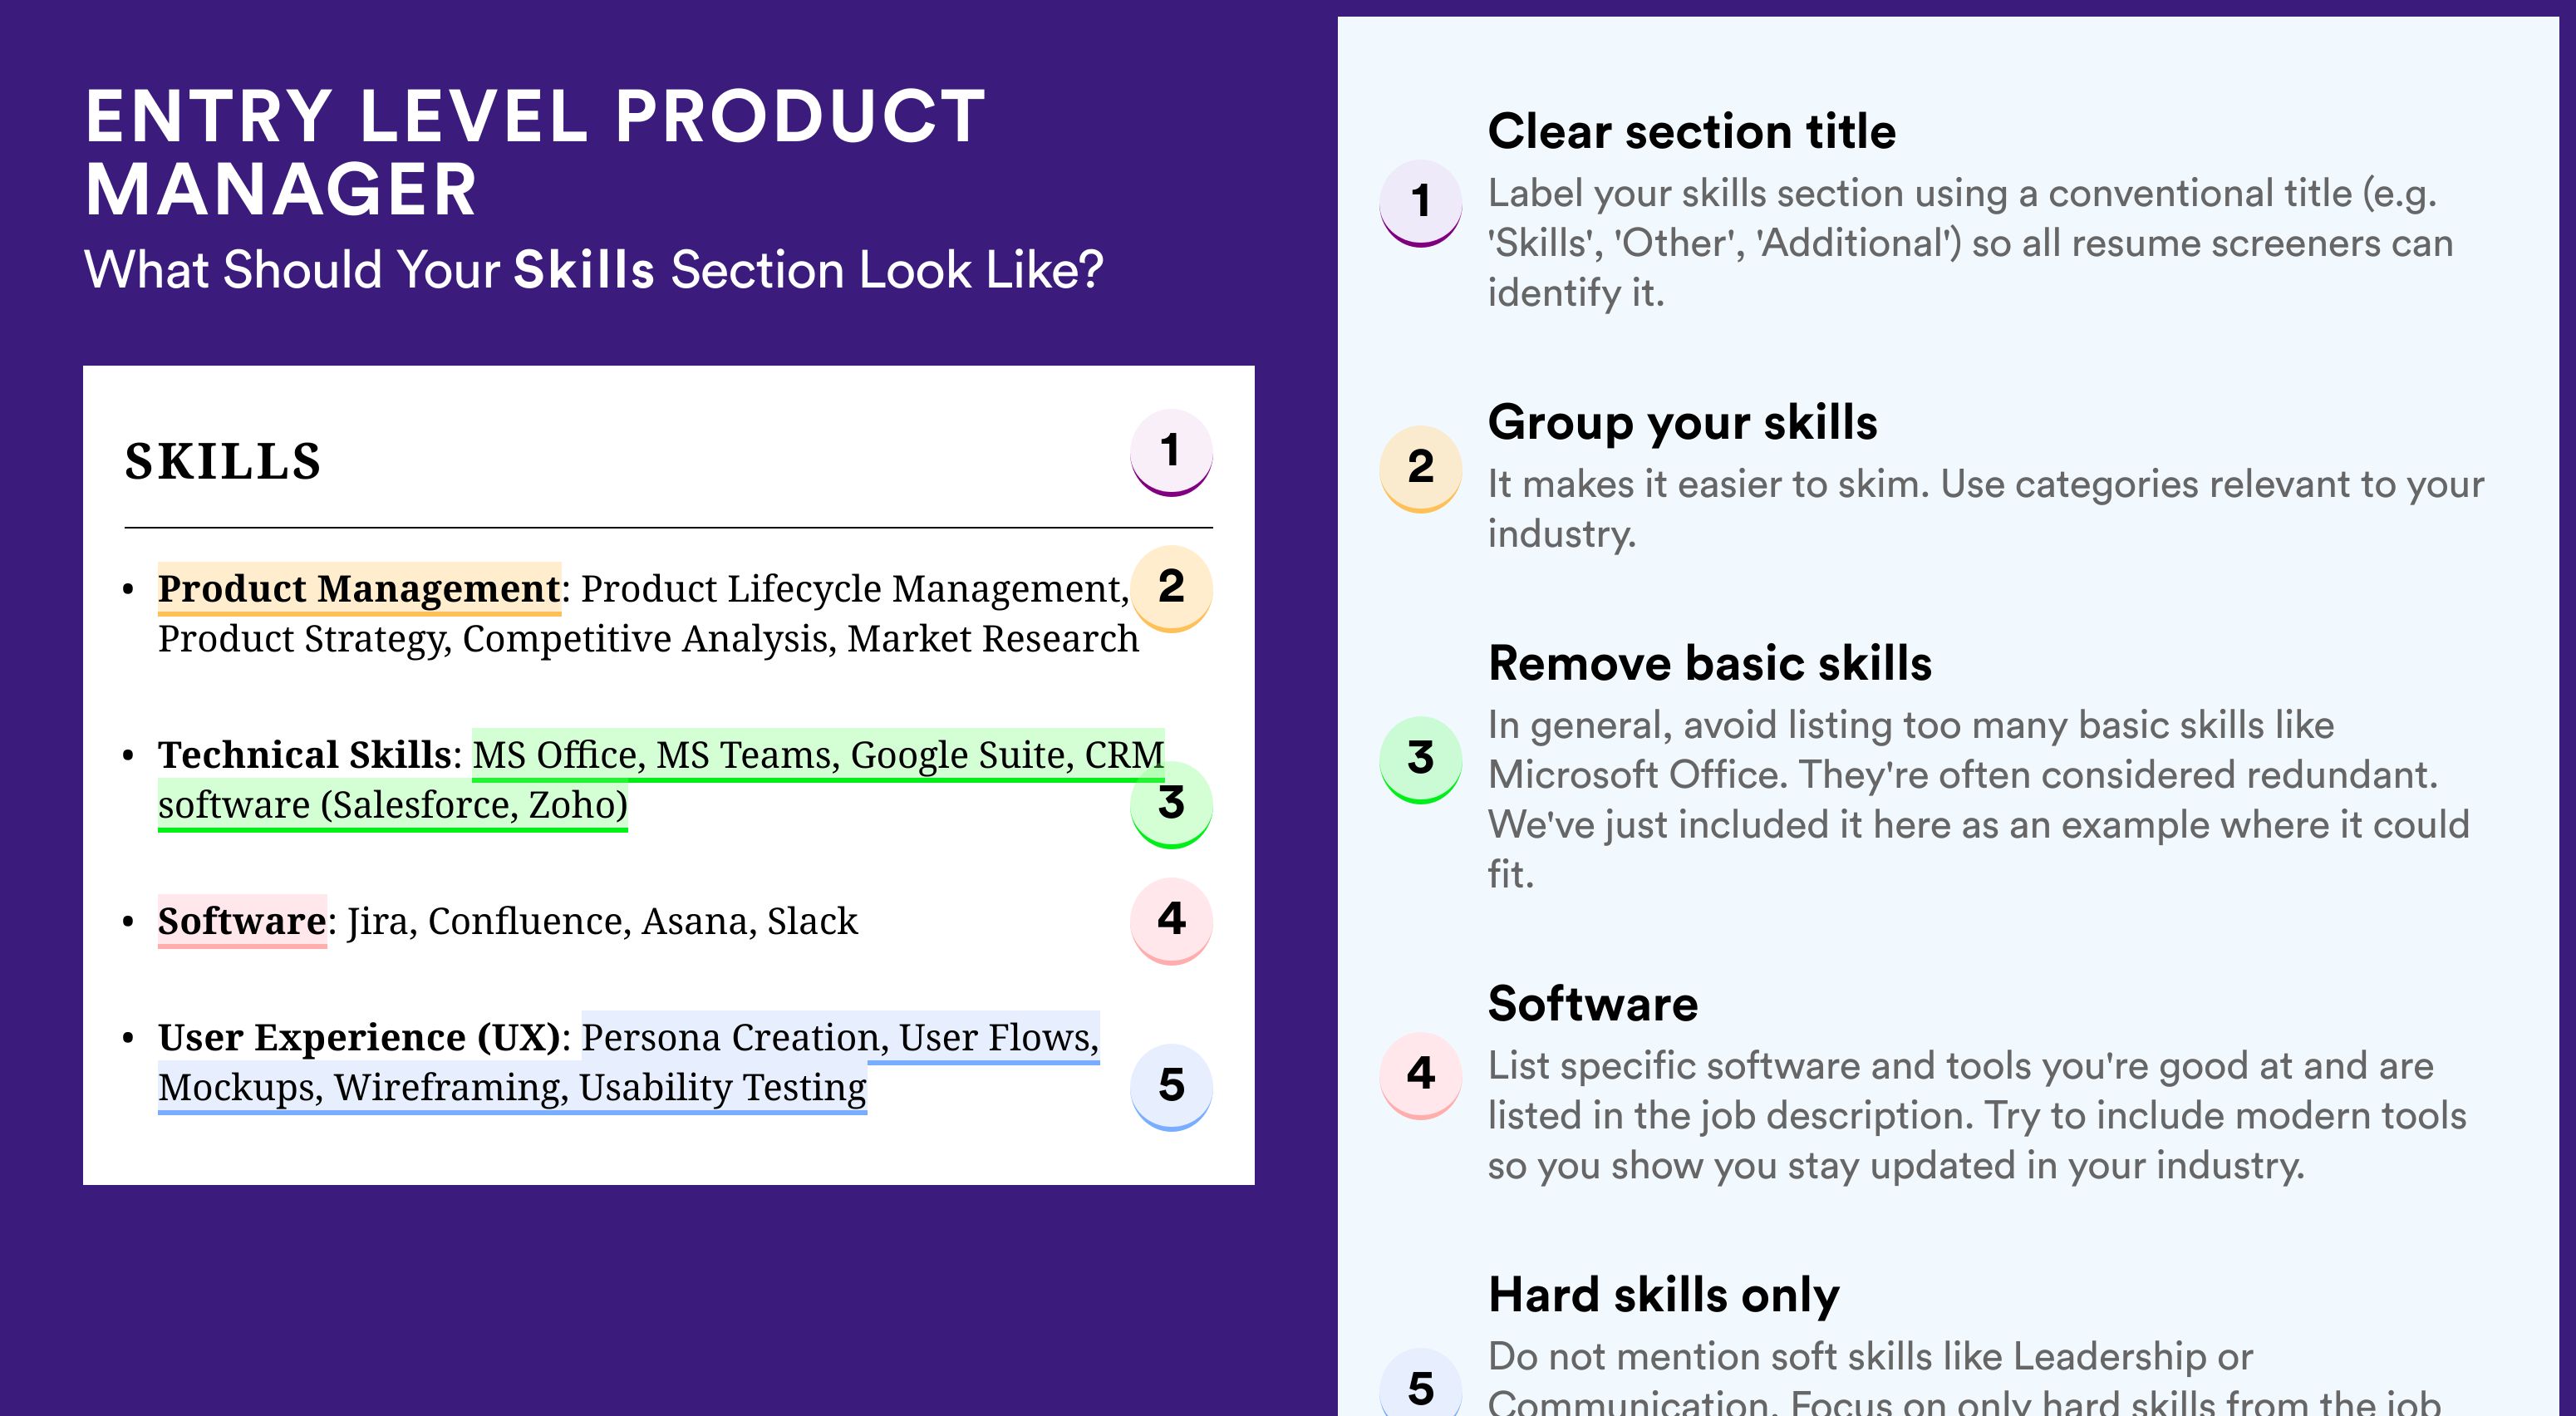 How To Write Your Skills Section - Entry Level Product Manager Roles